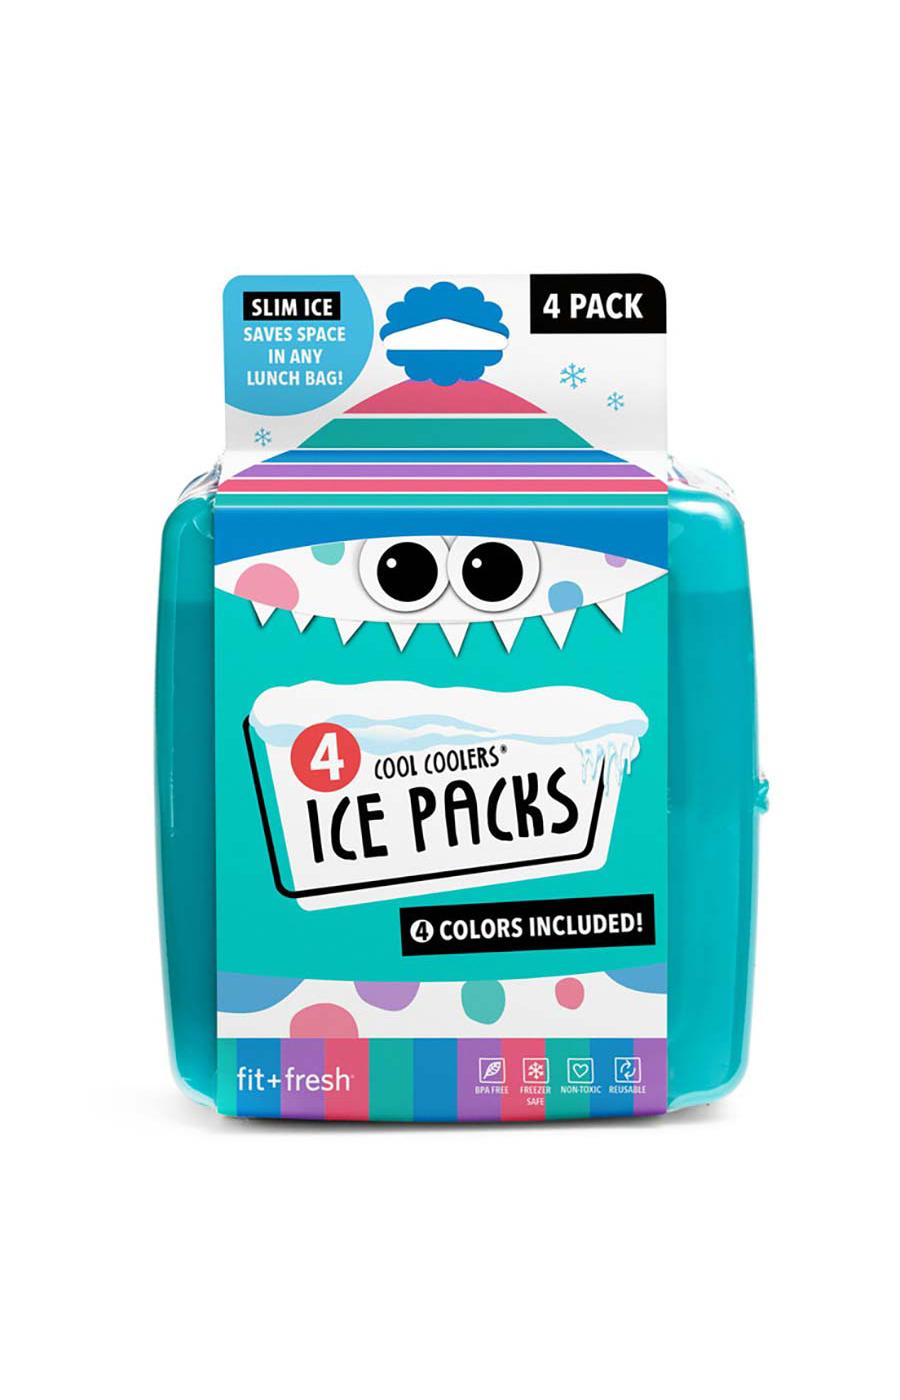 Fit + Fresh Cool Coolers Ice Packs; image 1 of 2